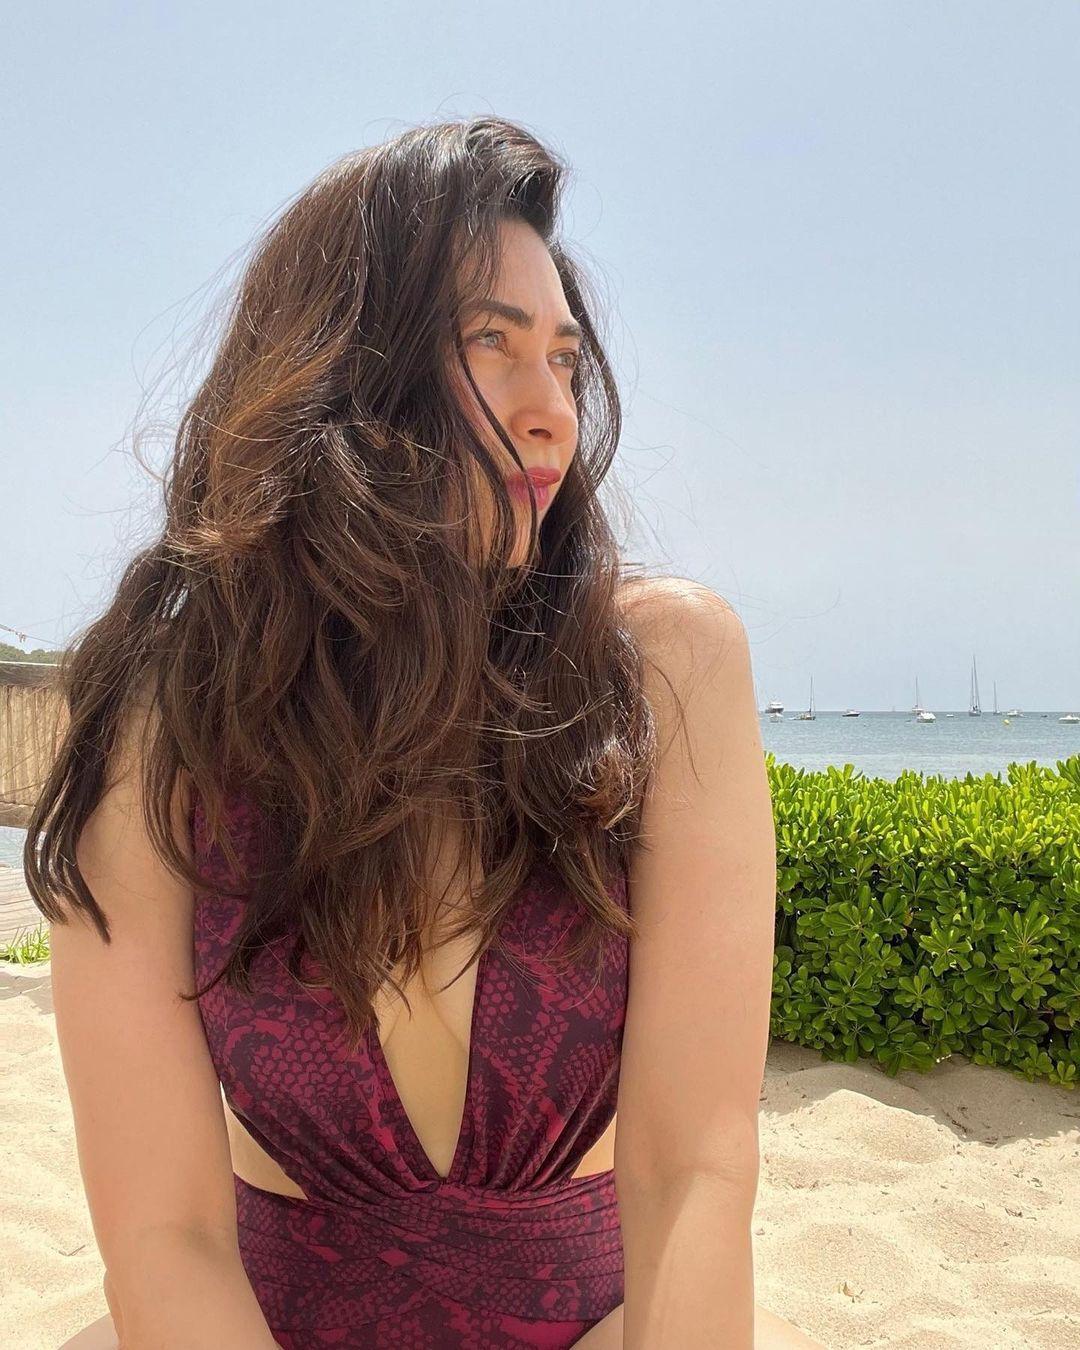 Karisma Kapoor is another Kapoor with the travel bug, she is often pictured at beachy locations